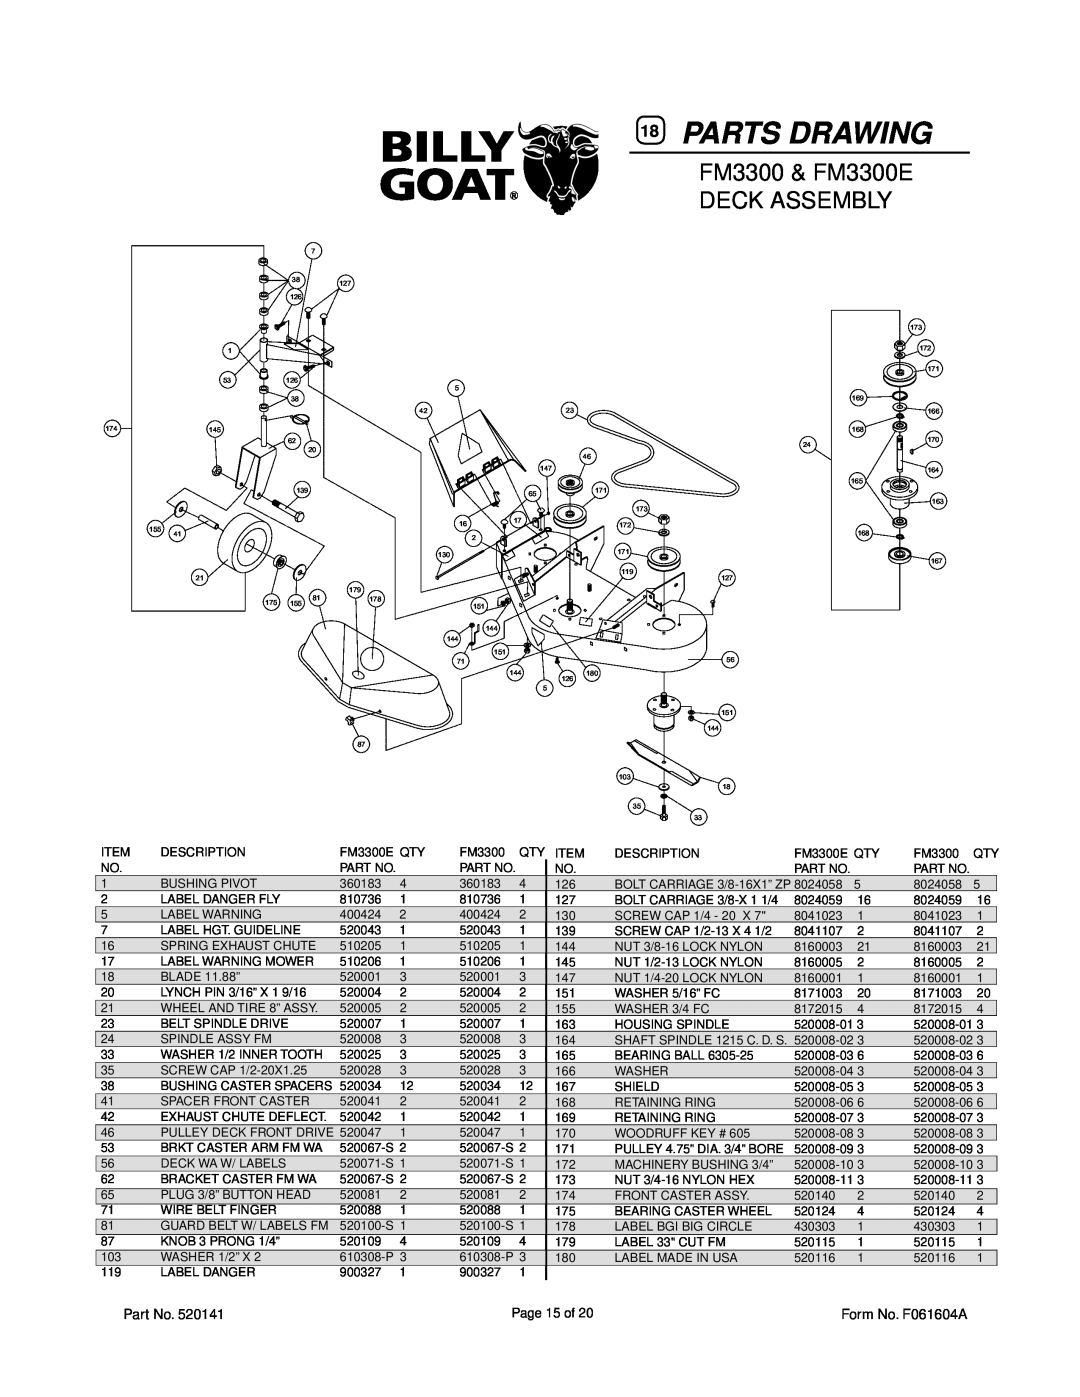 Billy Goat owner manual Parts Drawing, FM3300 & FM3300E DECK ASSEMBLY 